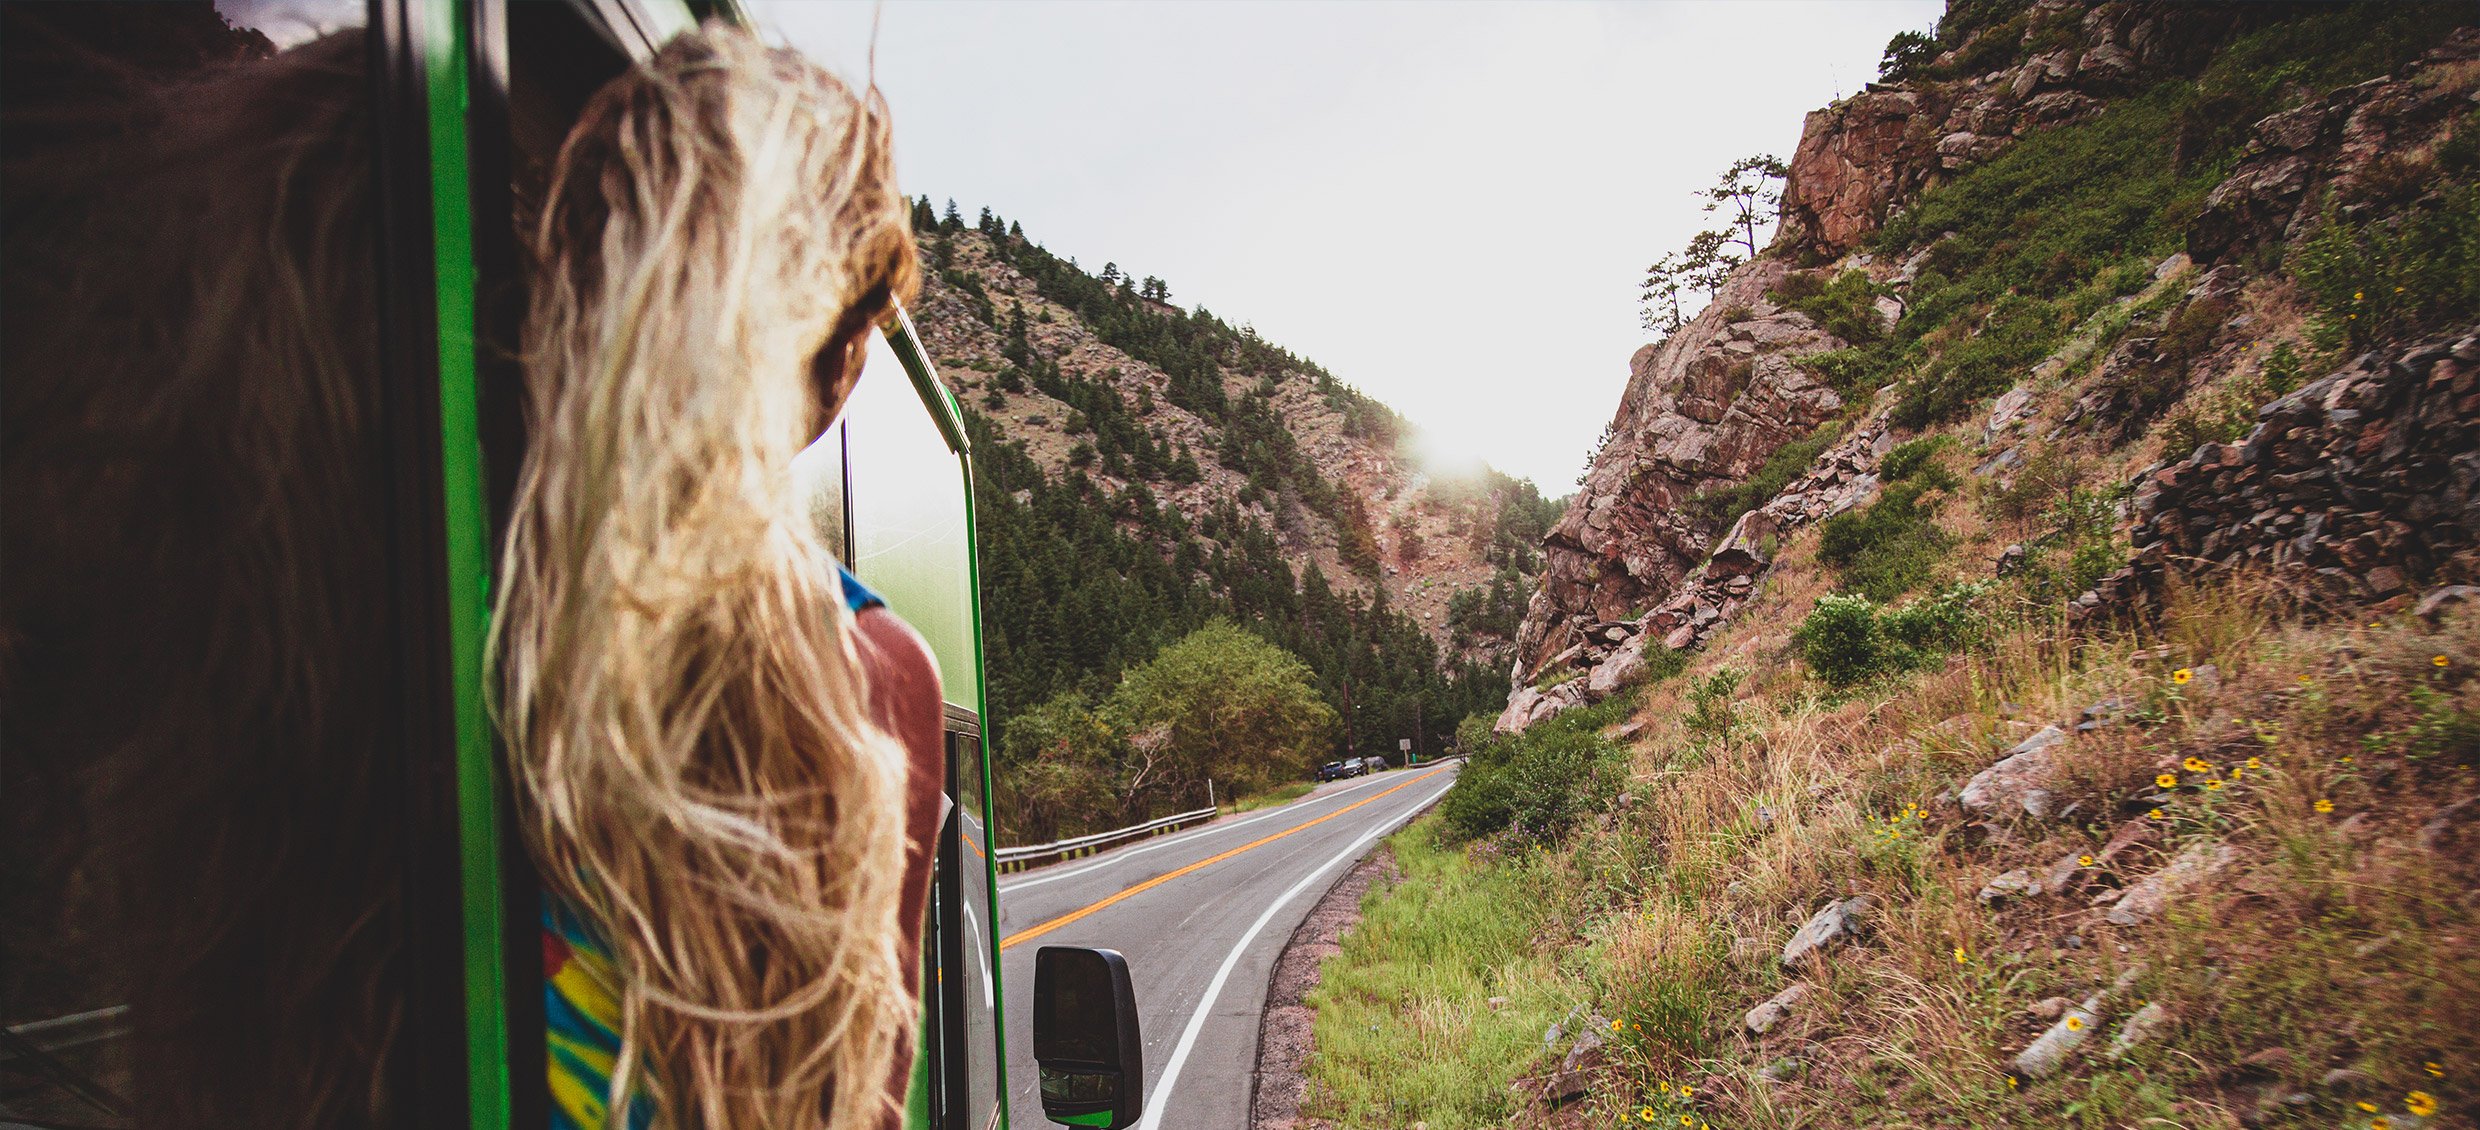 Woman optimistically looks out the window to see the road ahead of the Roadtrip Nation green RV.